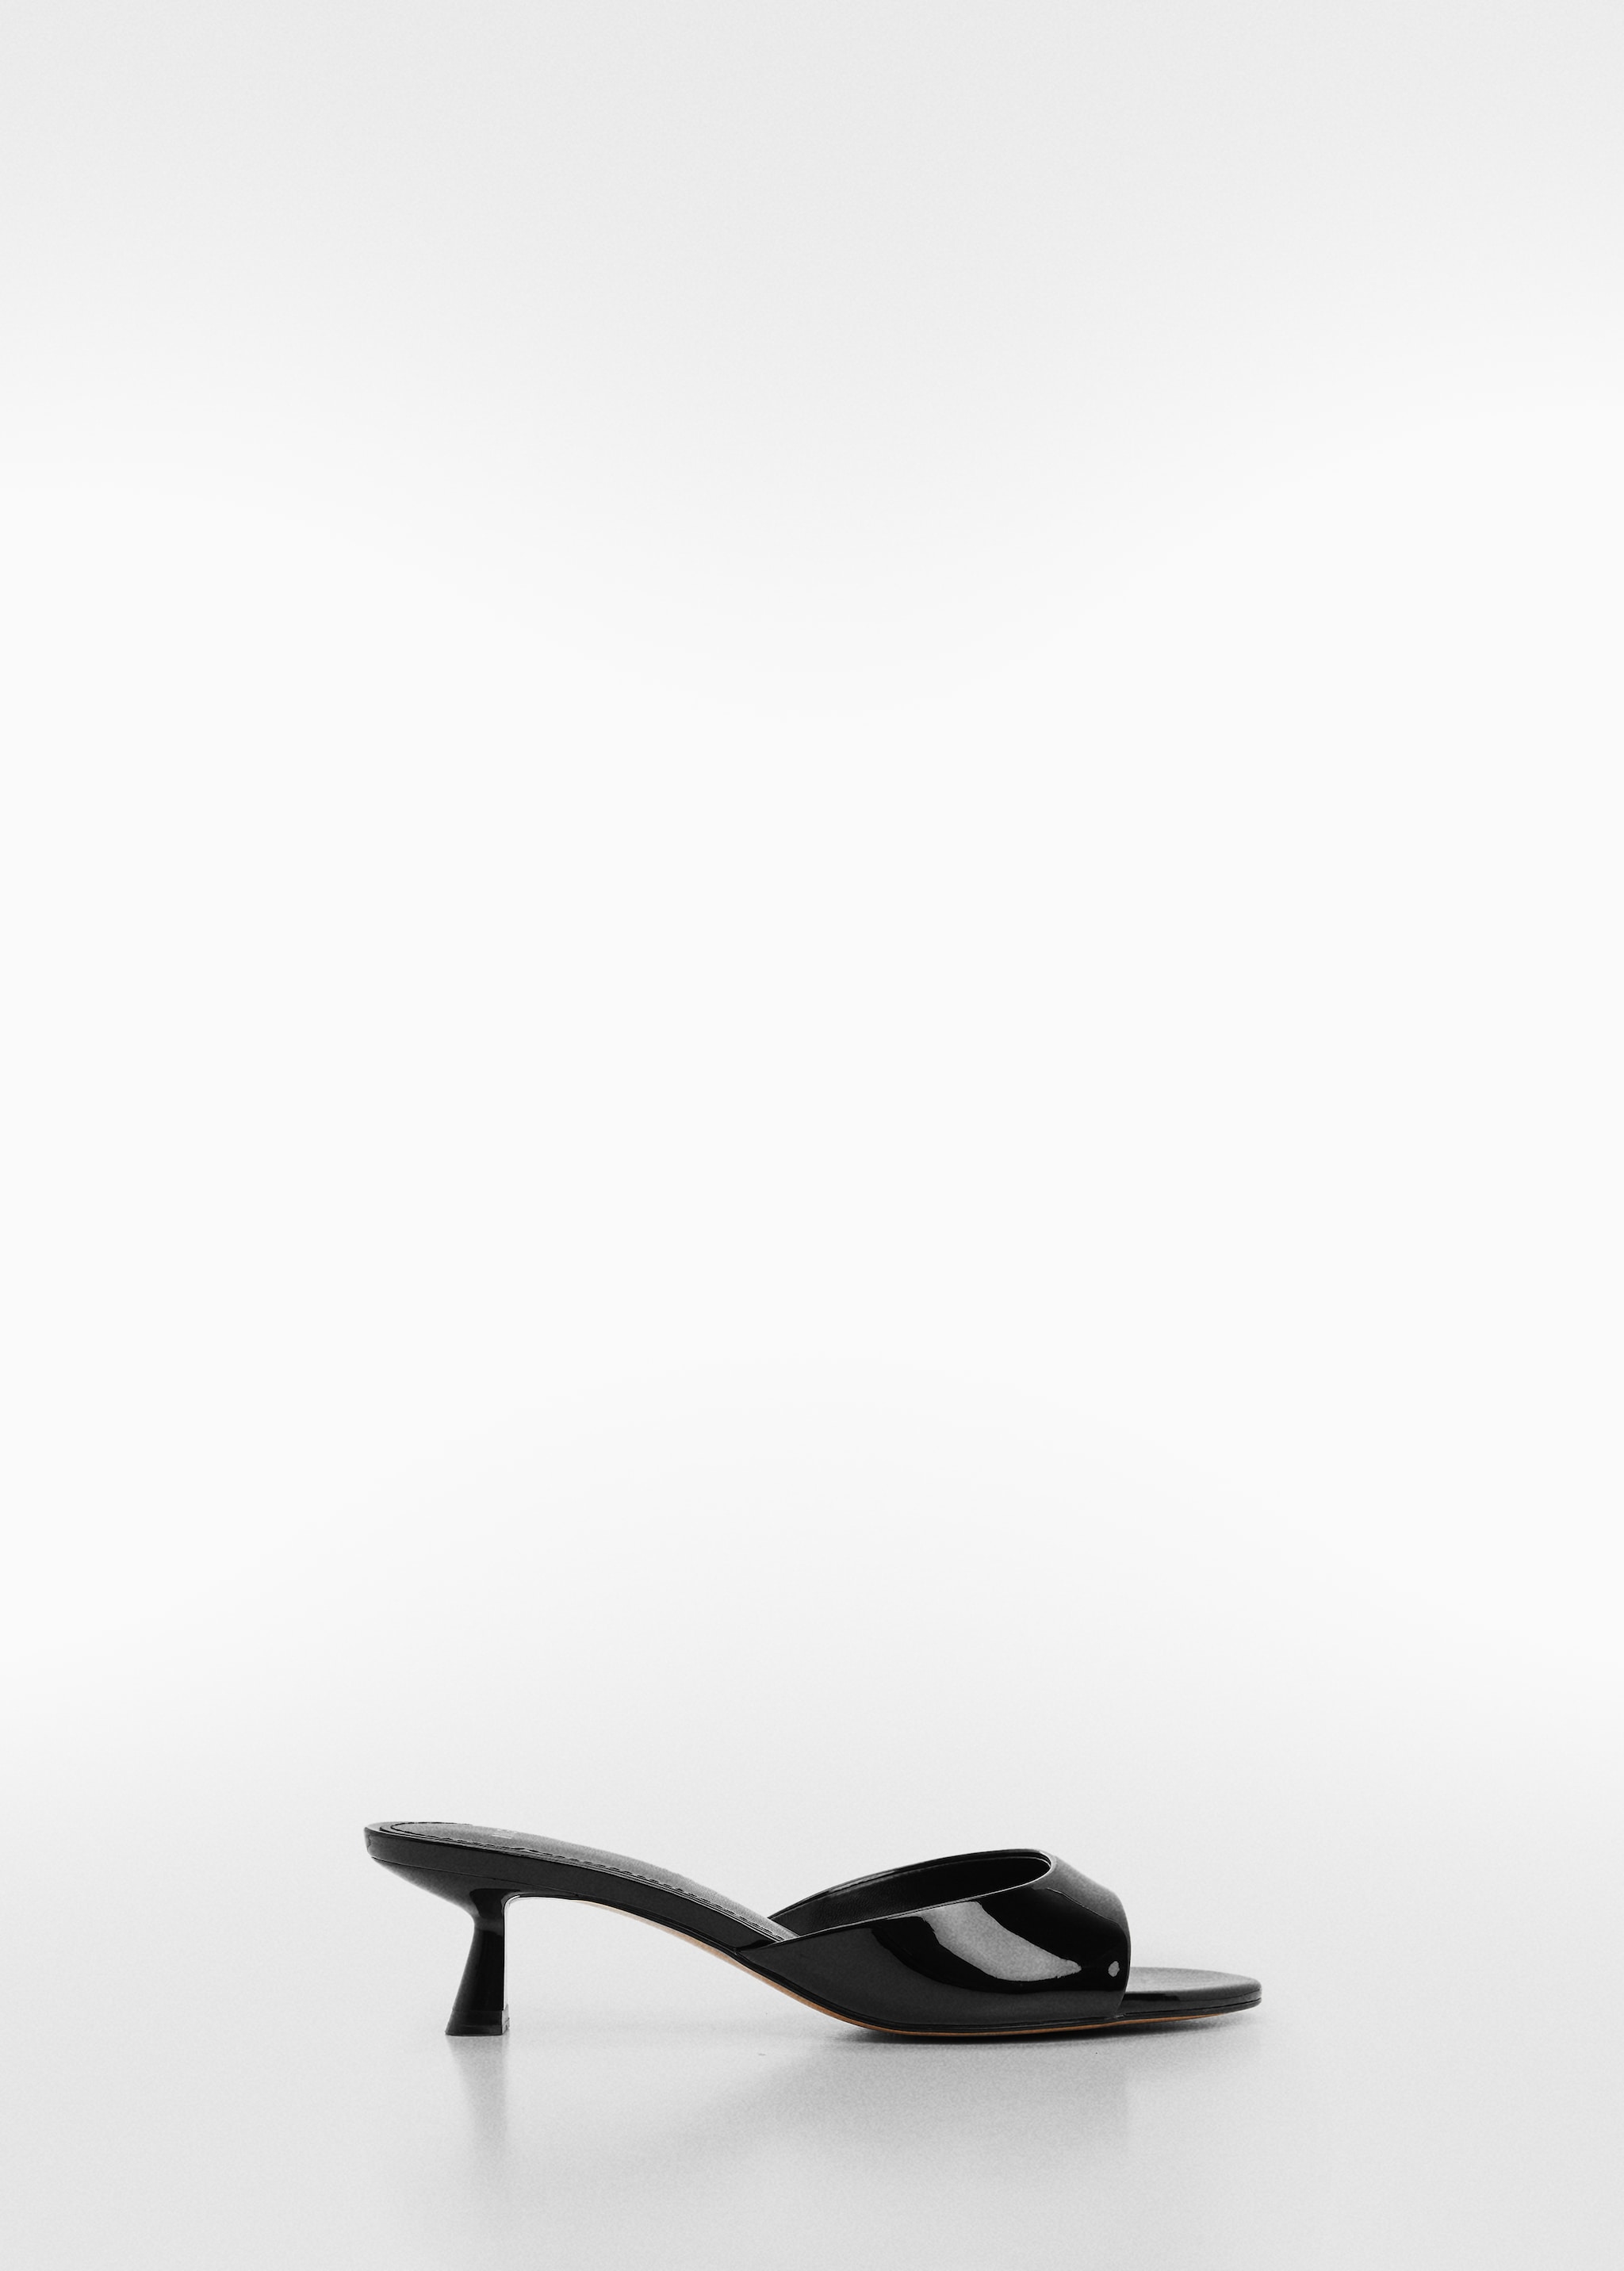 Patent leather effect heeled sandal - Article without model